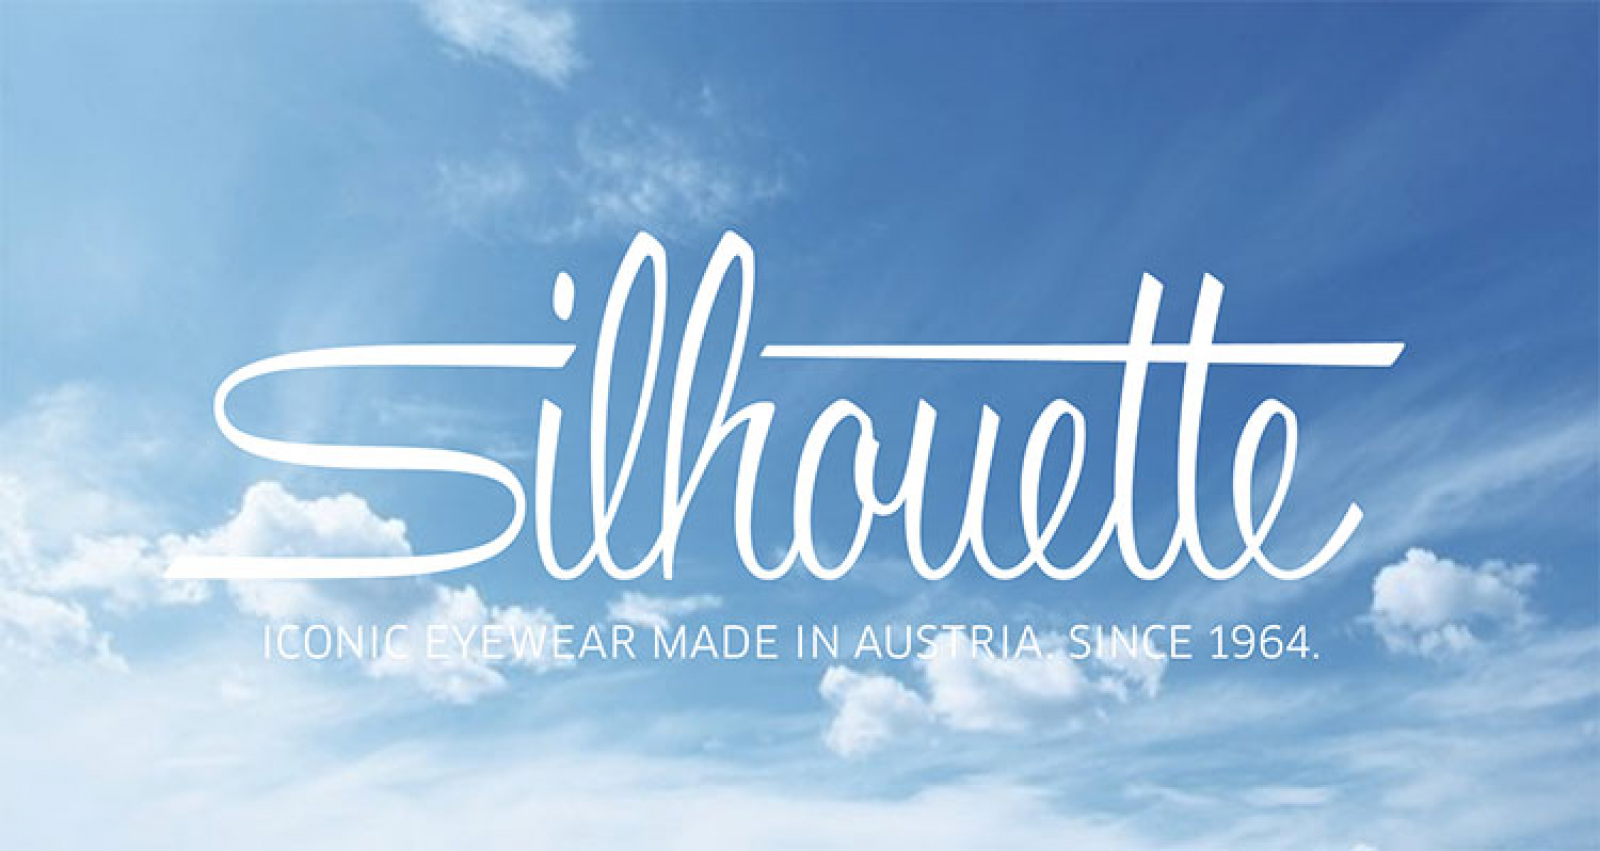 Silhouette Group is CO2 neutral as of 7th September